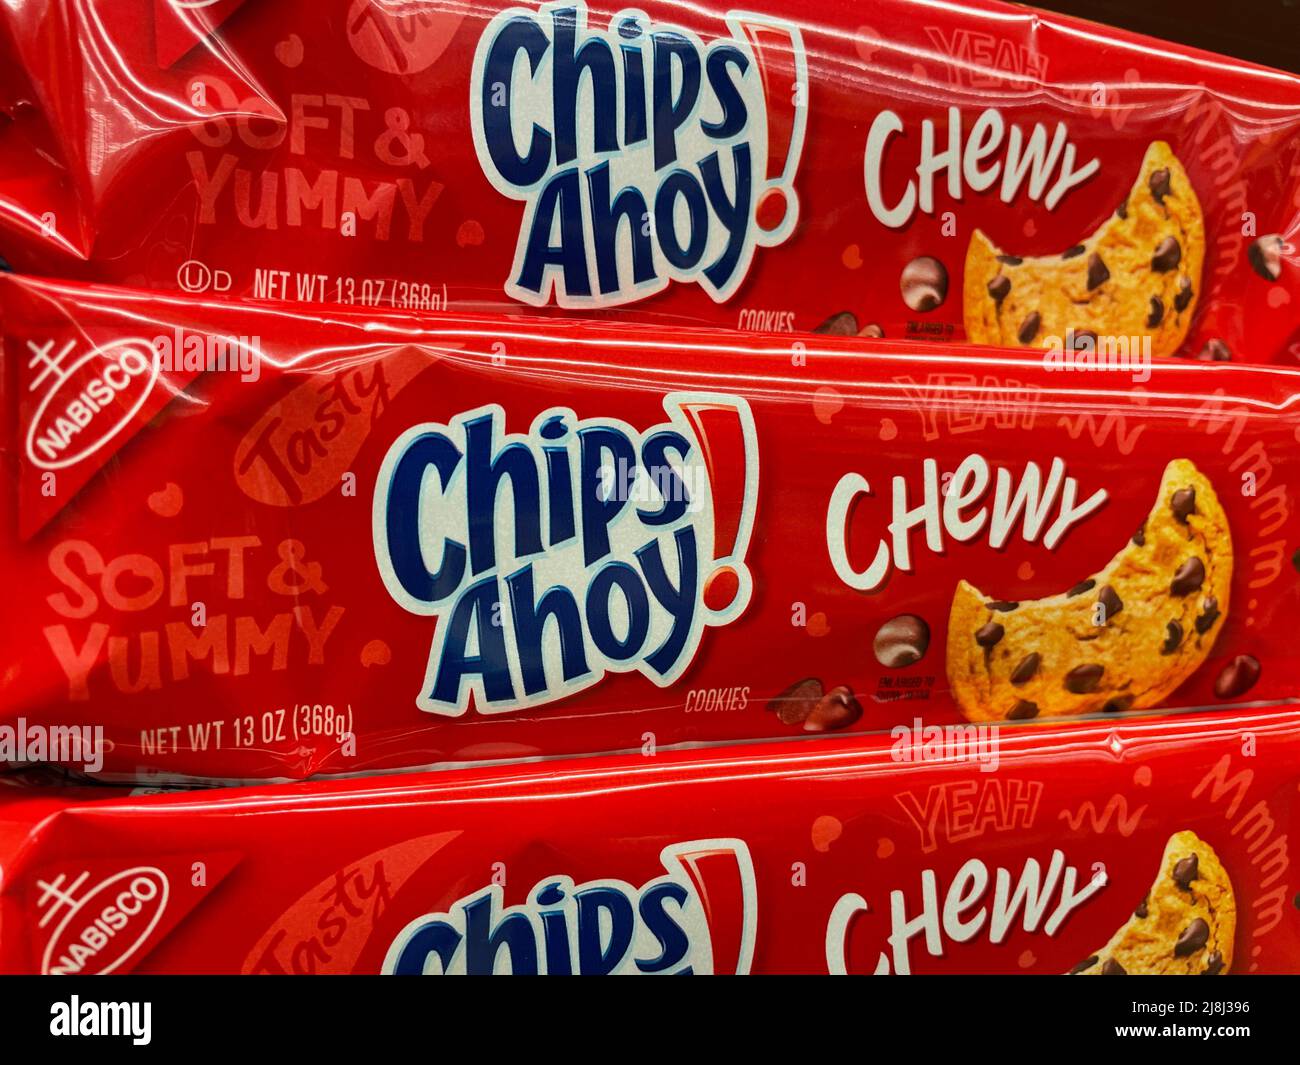 Grovetown, Ga USA - 04 15 22: Retail store cookies Chips Ahoy chewy Stock Photo